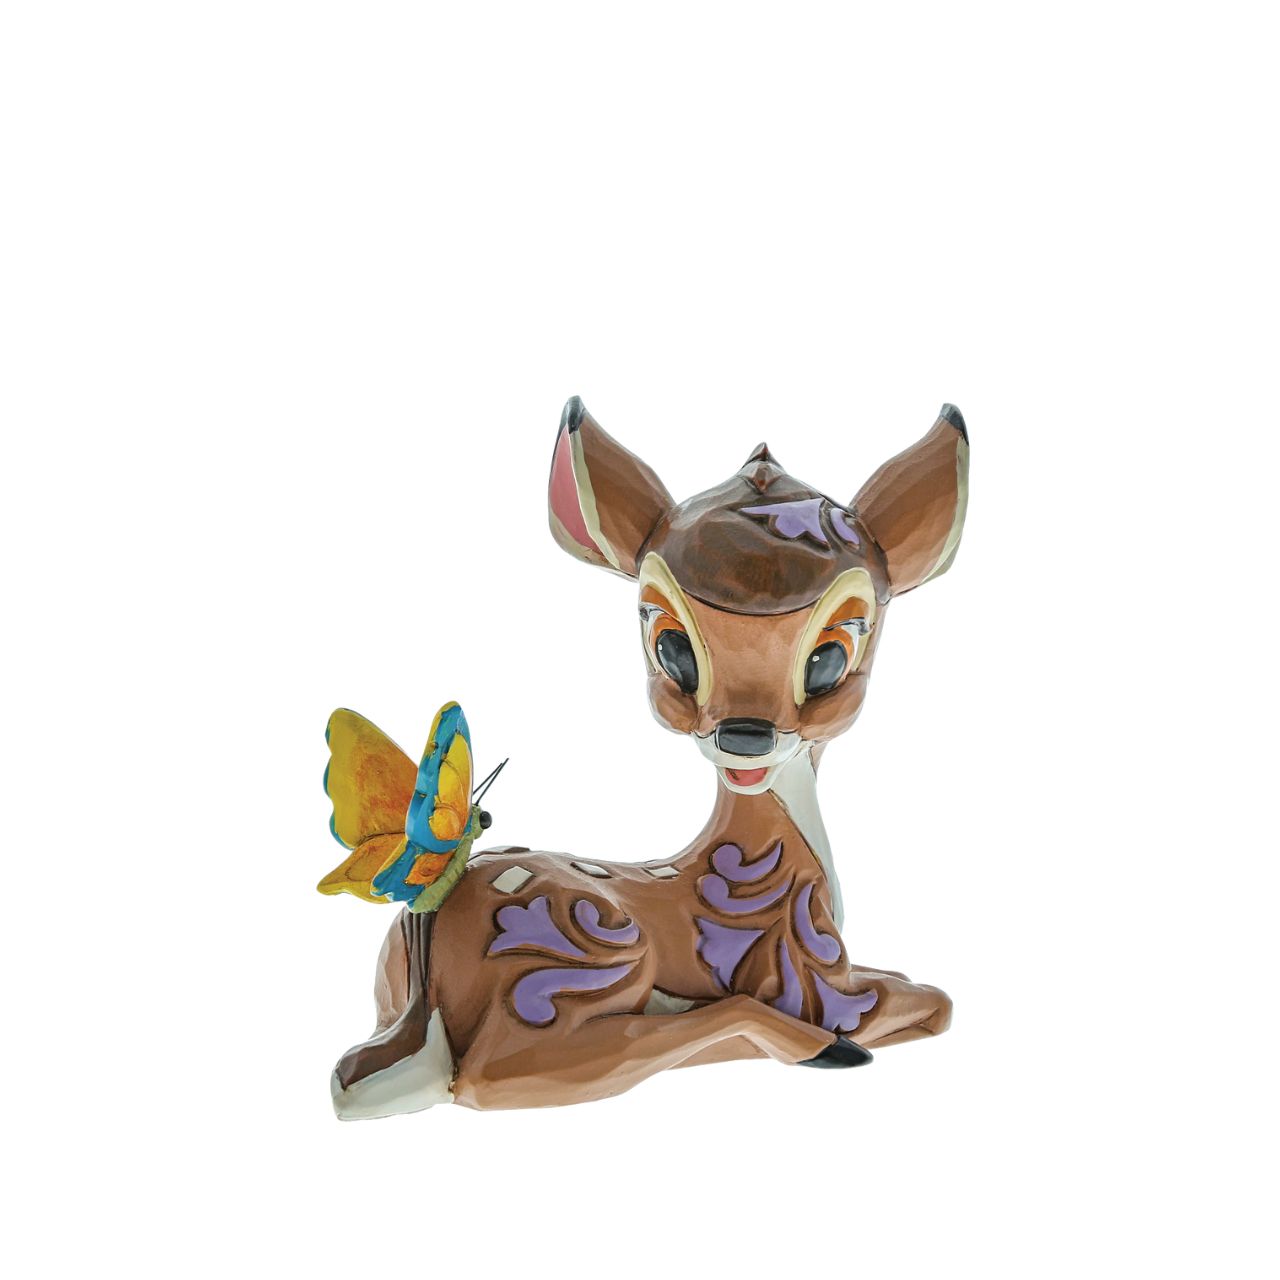 Disney Traditions Bambi Mini Figurine  With pleasing rosemaling detail and beautiful craftsmanship, this lovely Disney piece is a prize from the forest. Jim Shore celebrates the 80th anniversary of Bambi with this sweet miniature, as the peaceful deer sits gracefully with a butterfly.